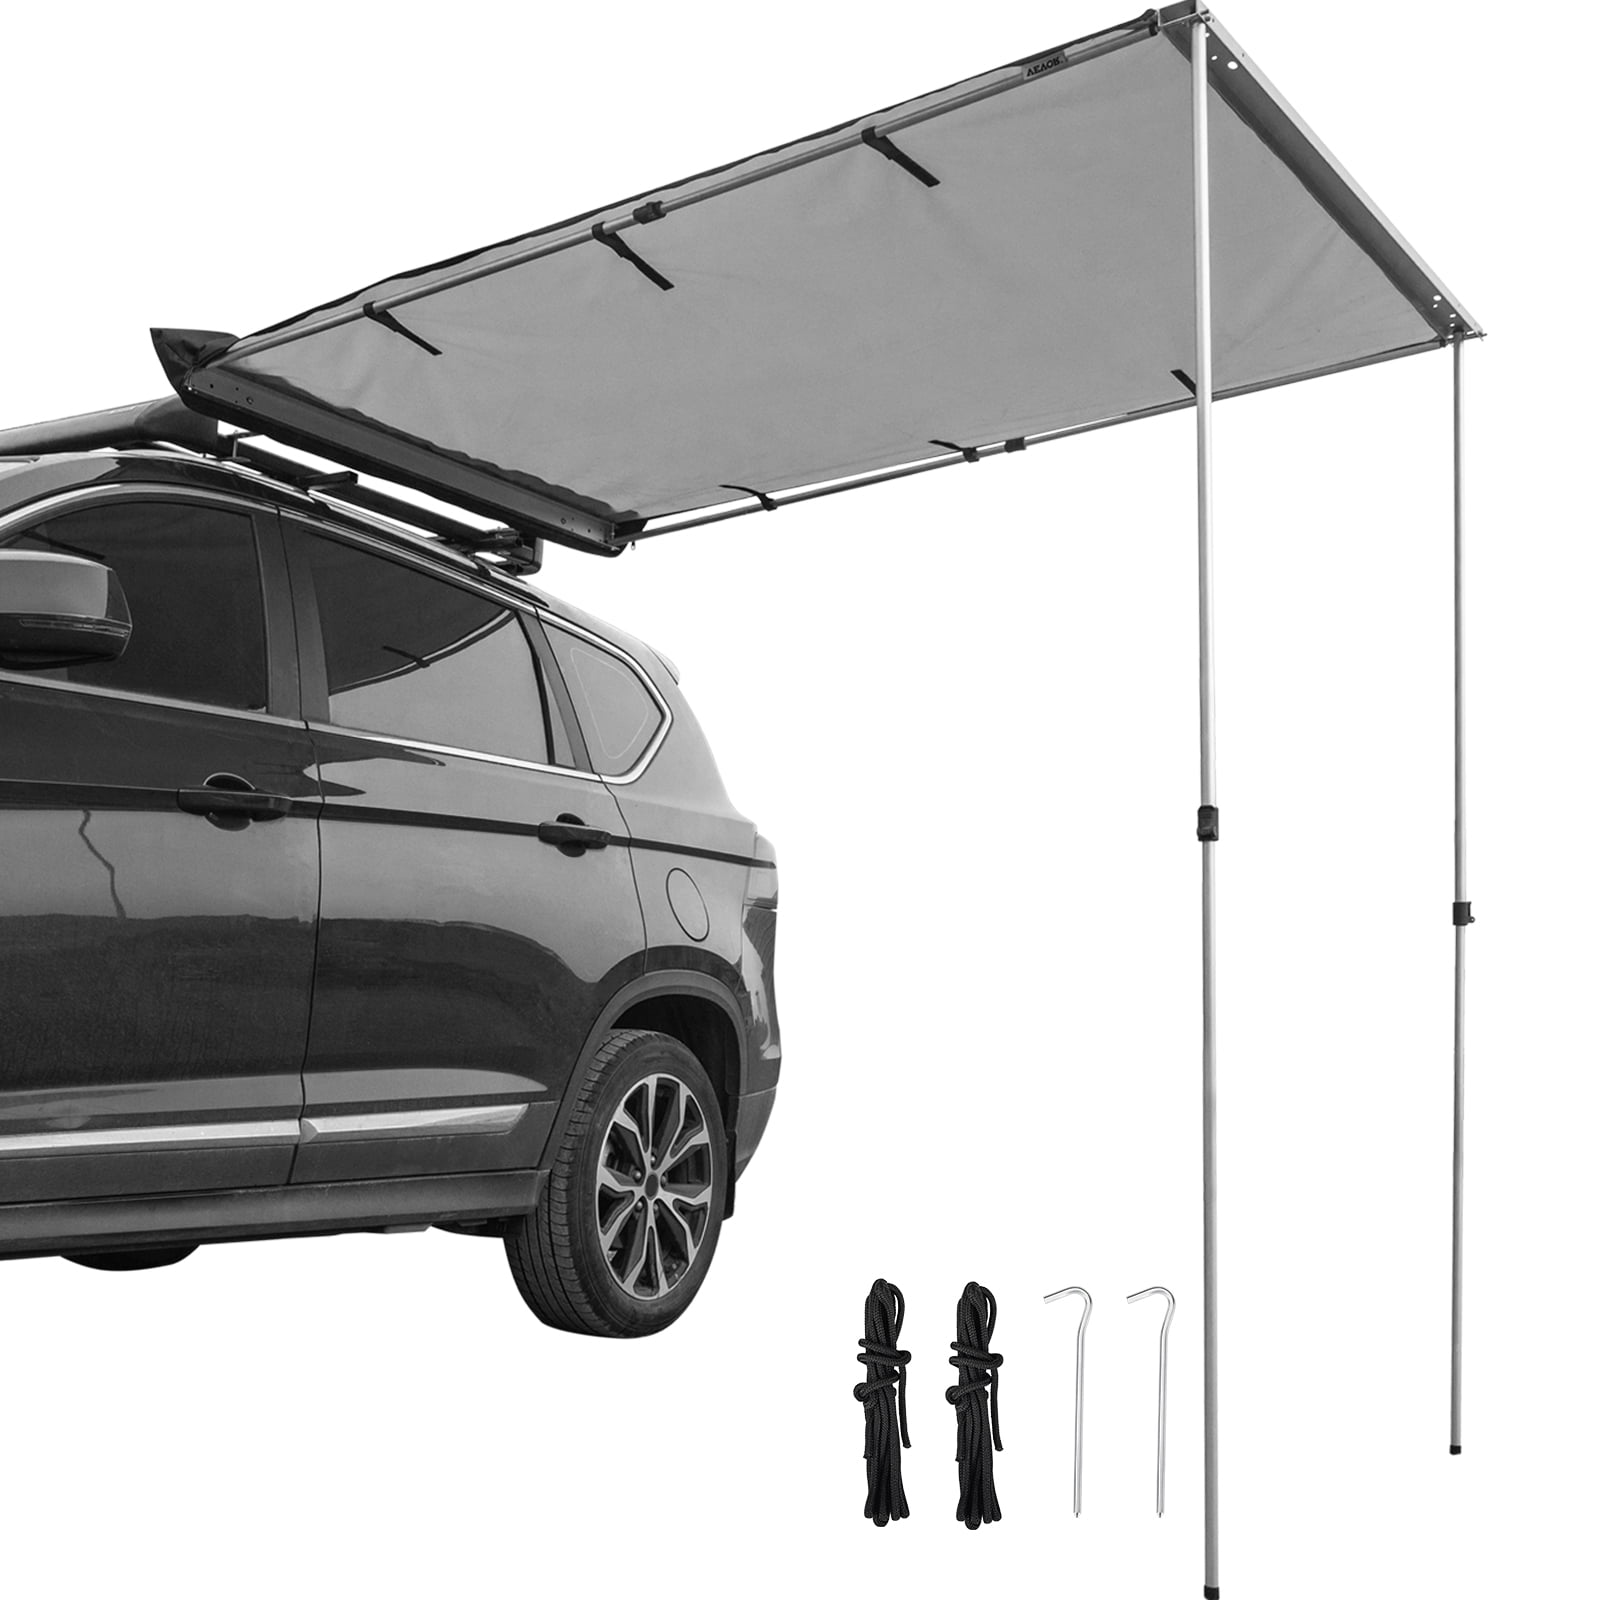 2x2M Car Side Awning Roof Top Tent Oxford Sun Shade Shelter Car Tent Grey Color 